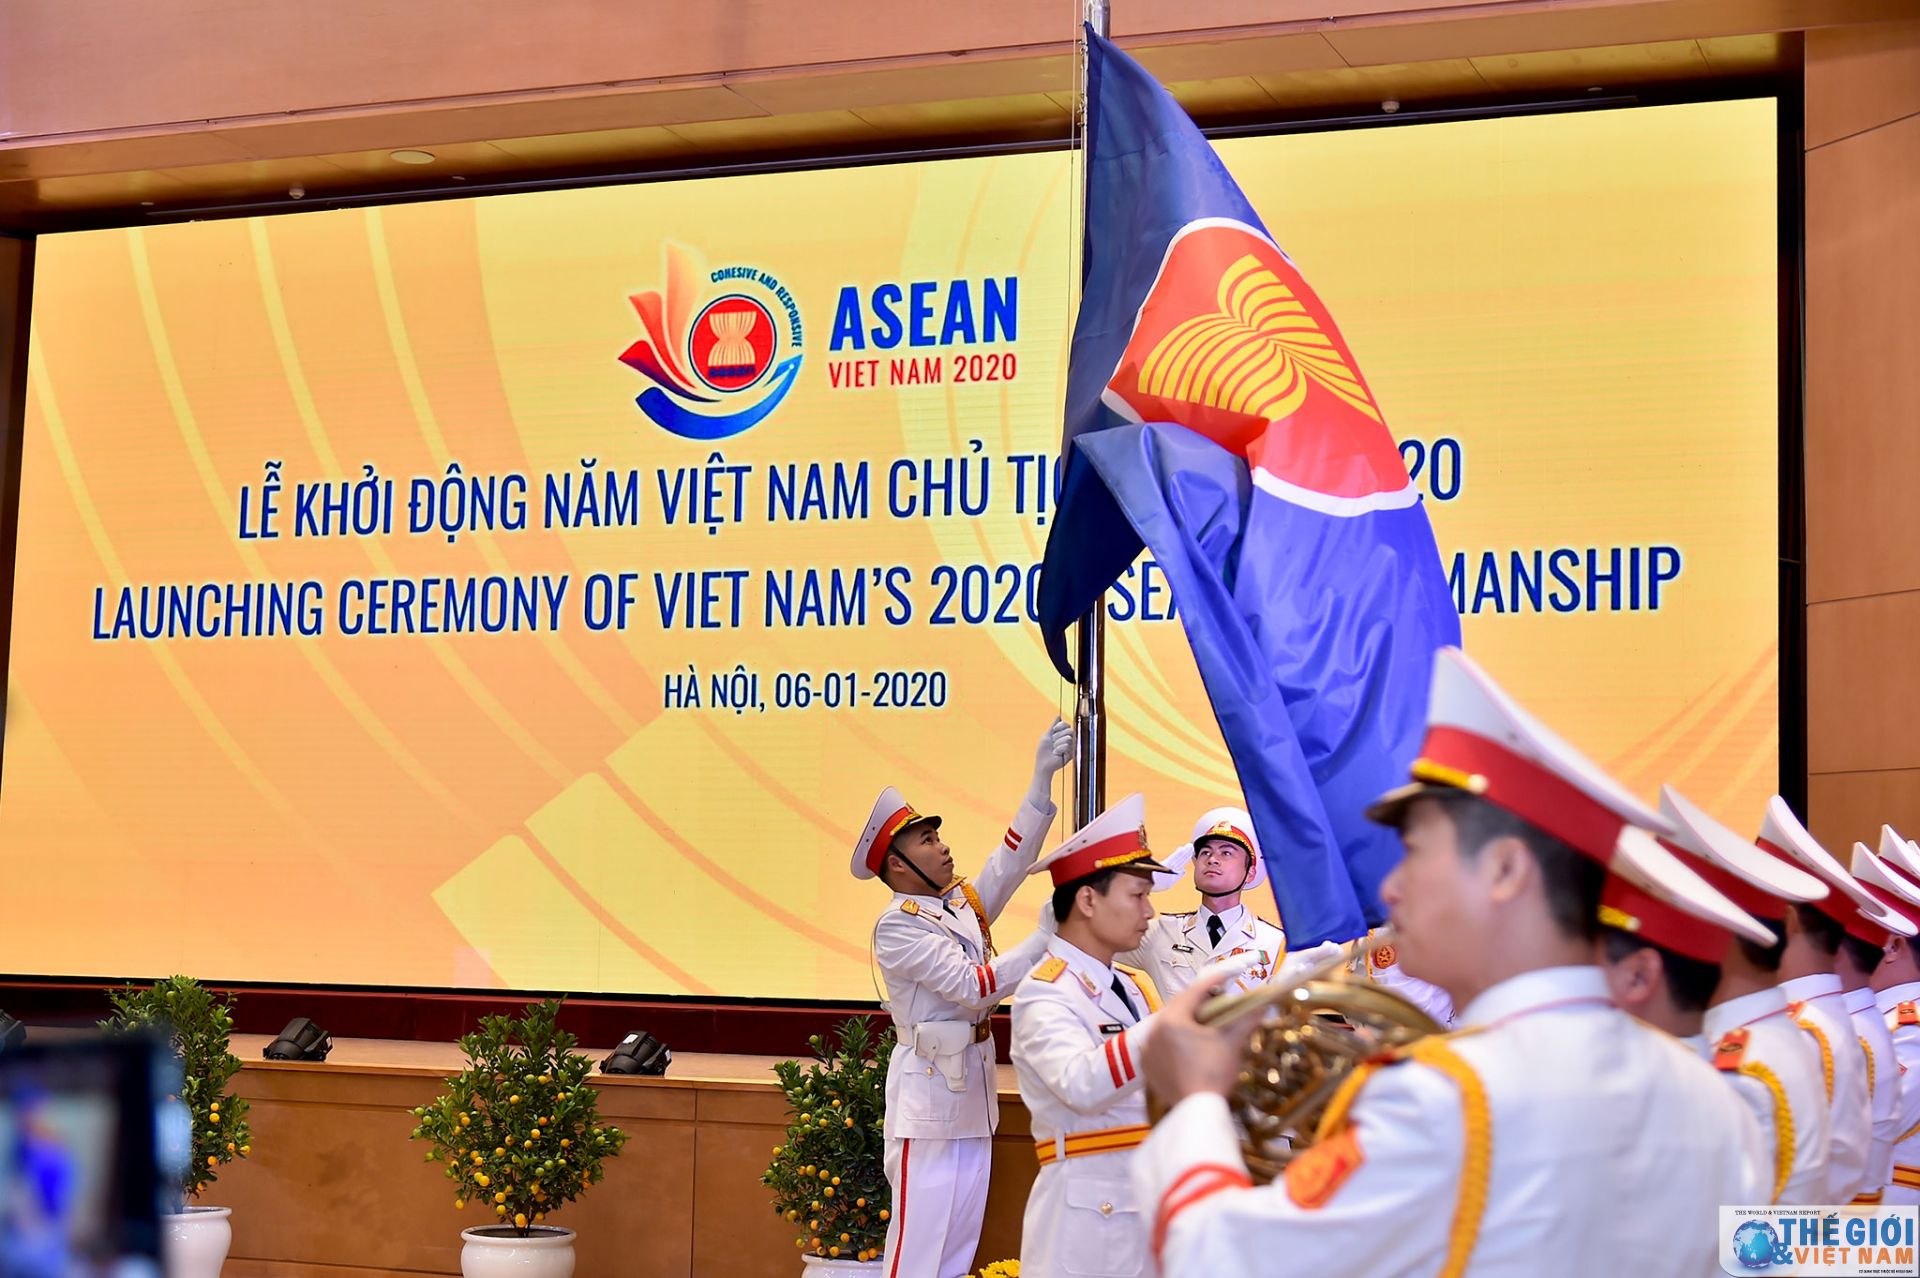 50 years of ASEAN - One vision, one identity, one community